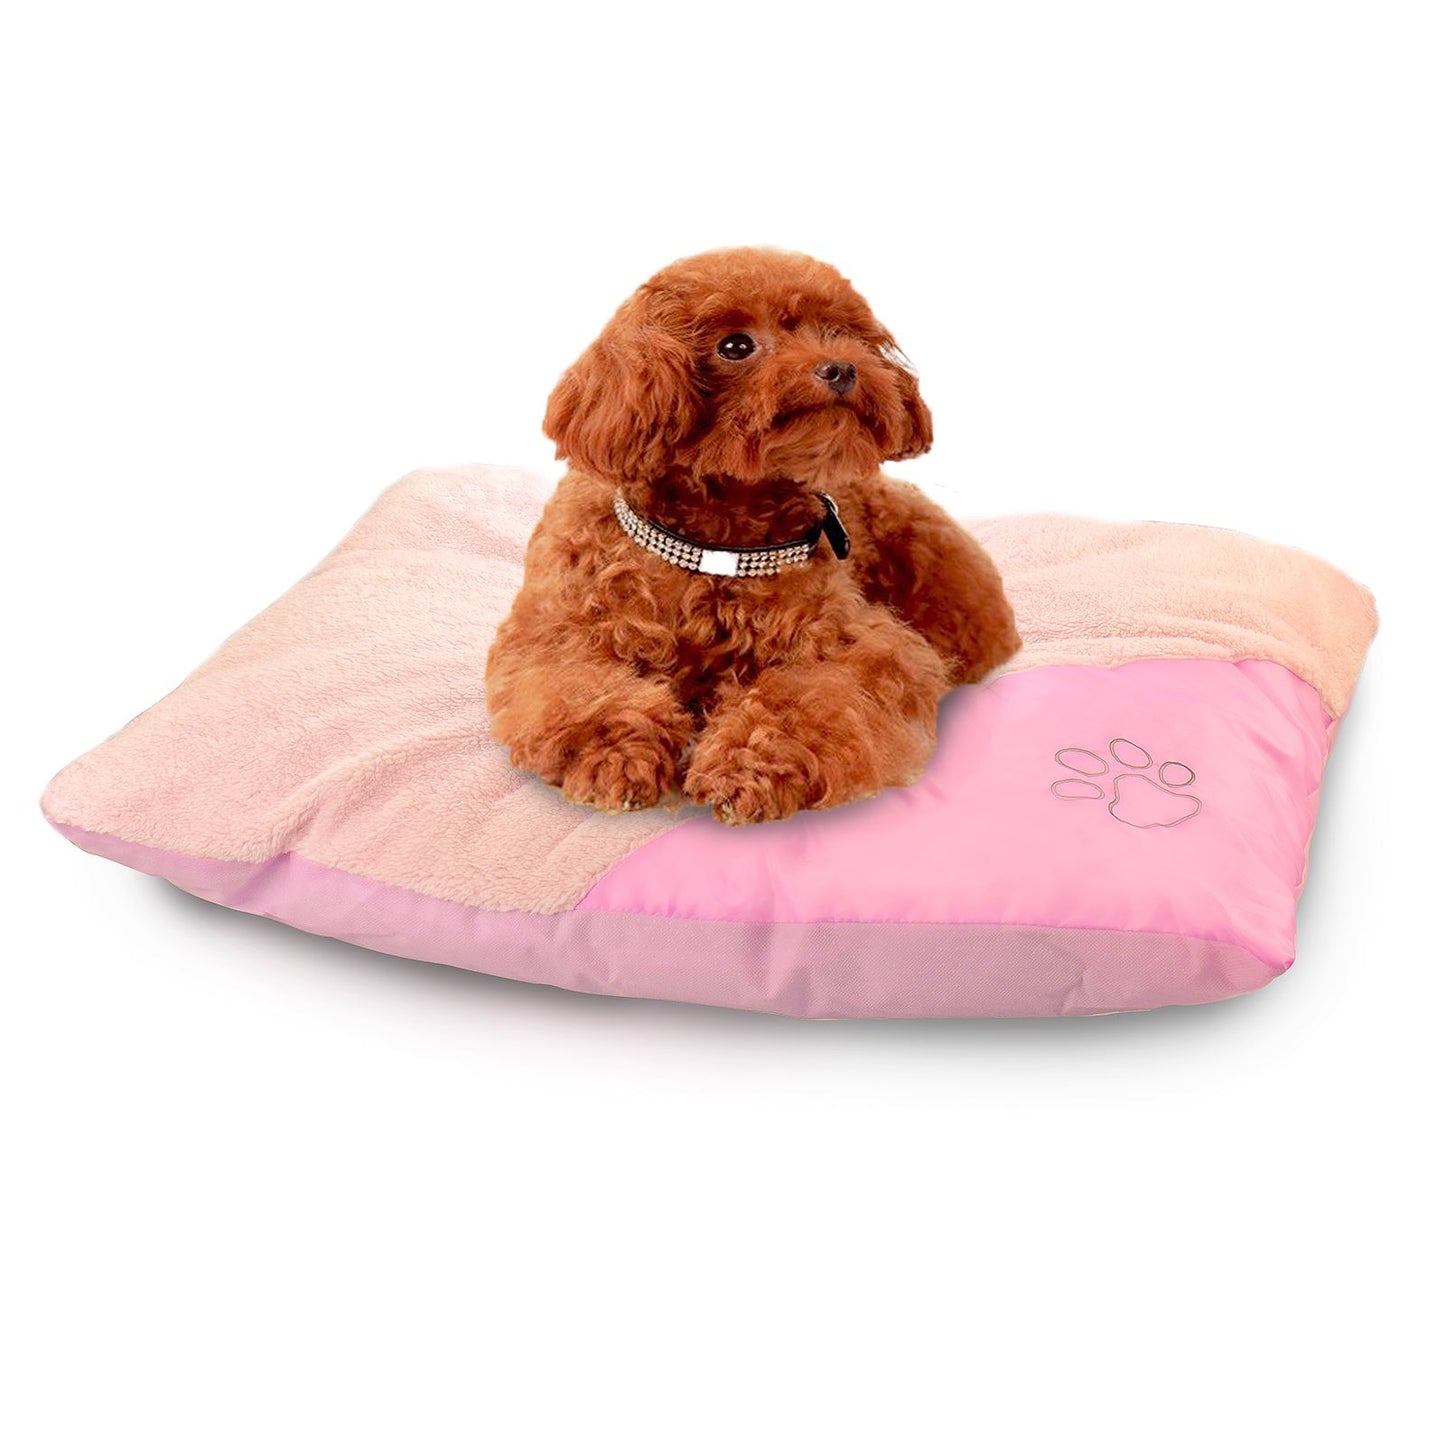 Soft Large Dog Mattress Bed For Comfortable Sleep